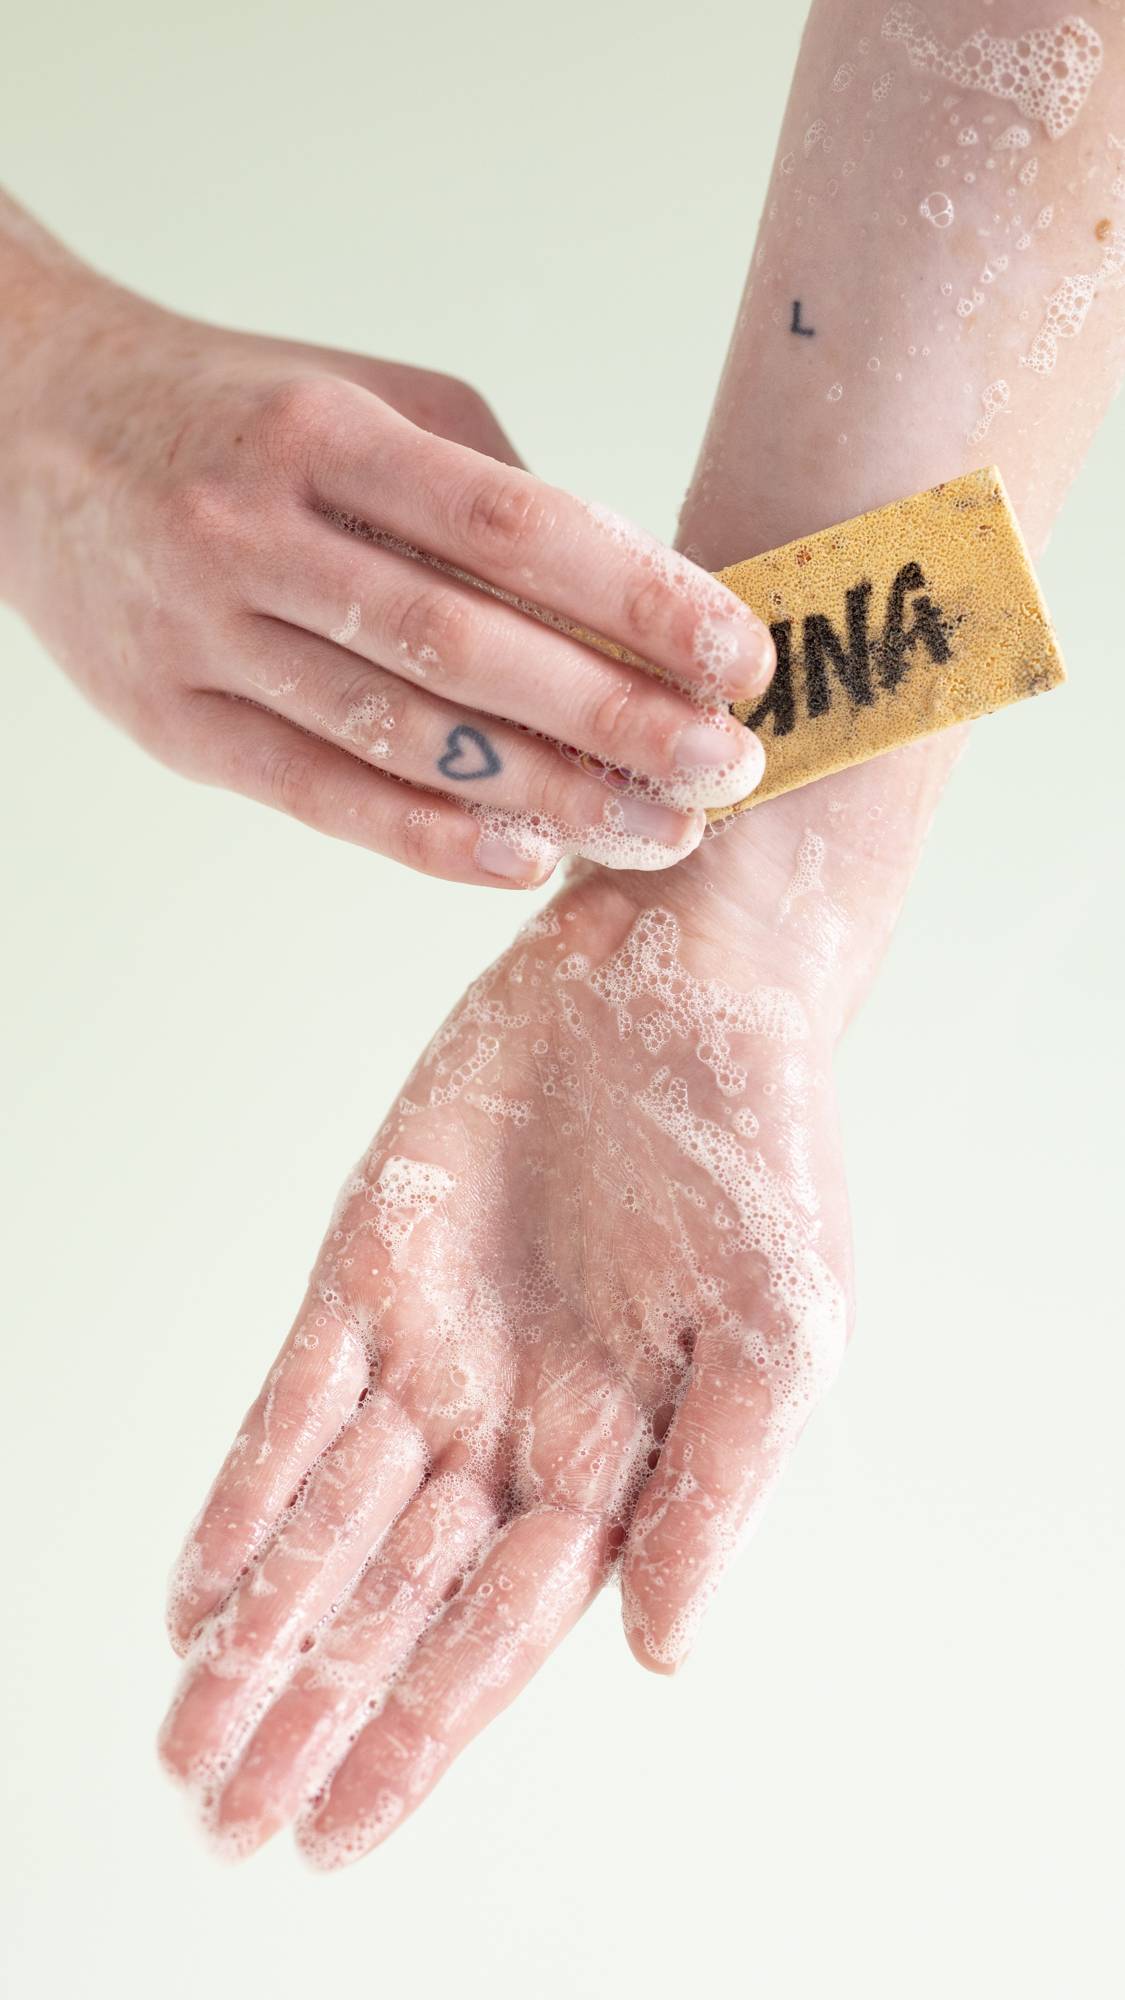 The image shows a close-up of the model's hands as the lather up the washcard under running water. 